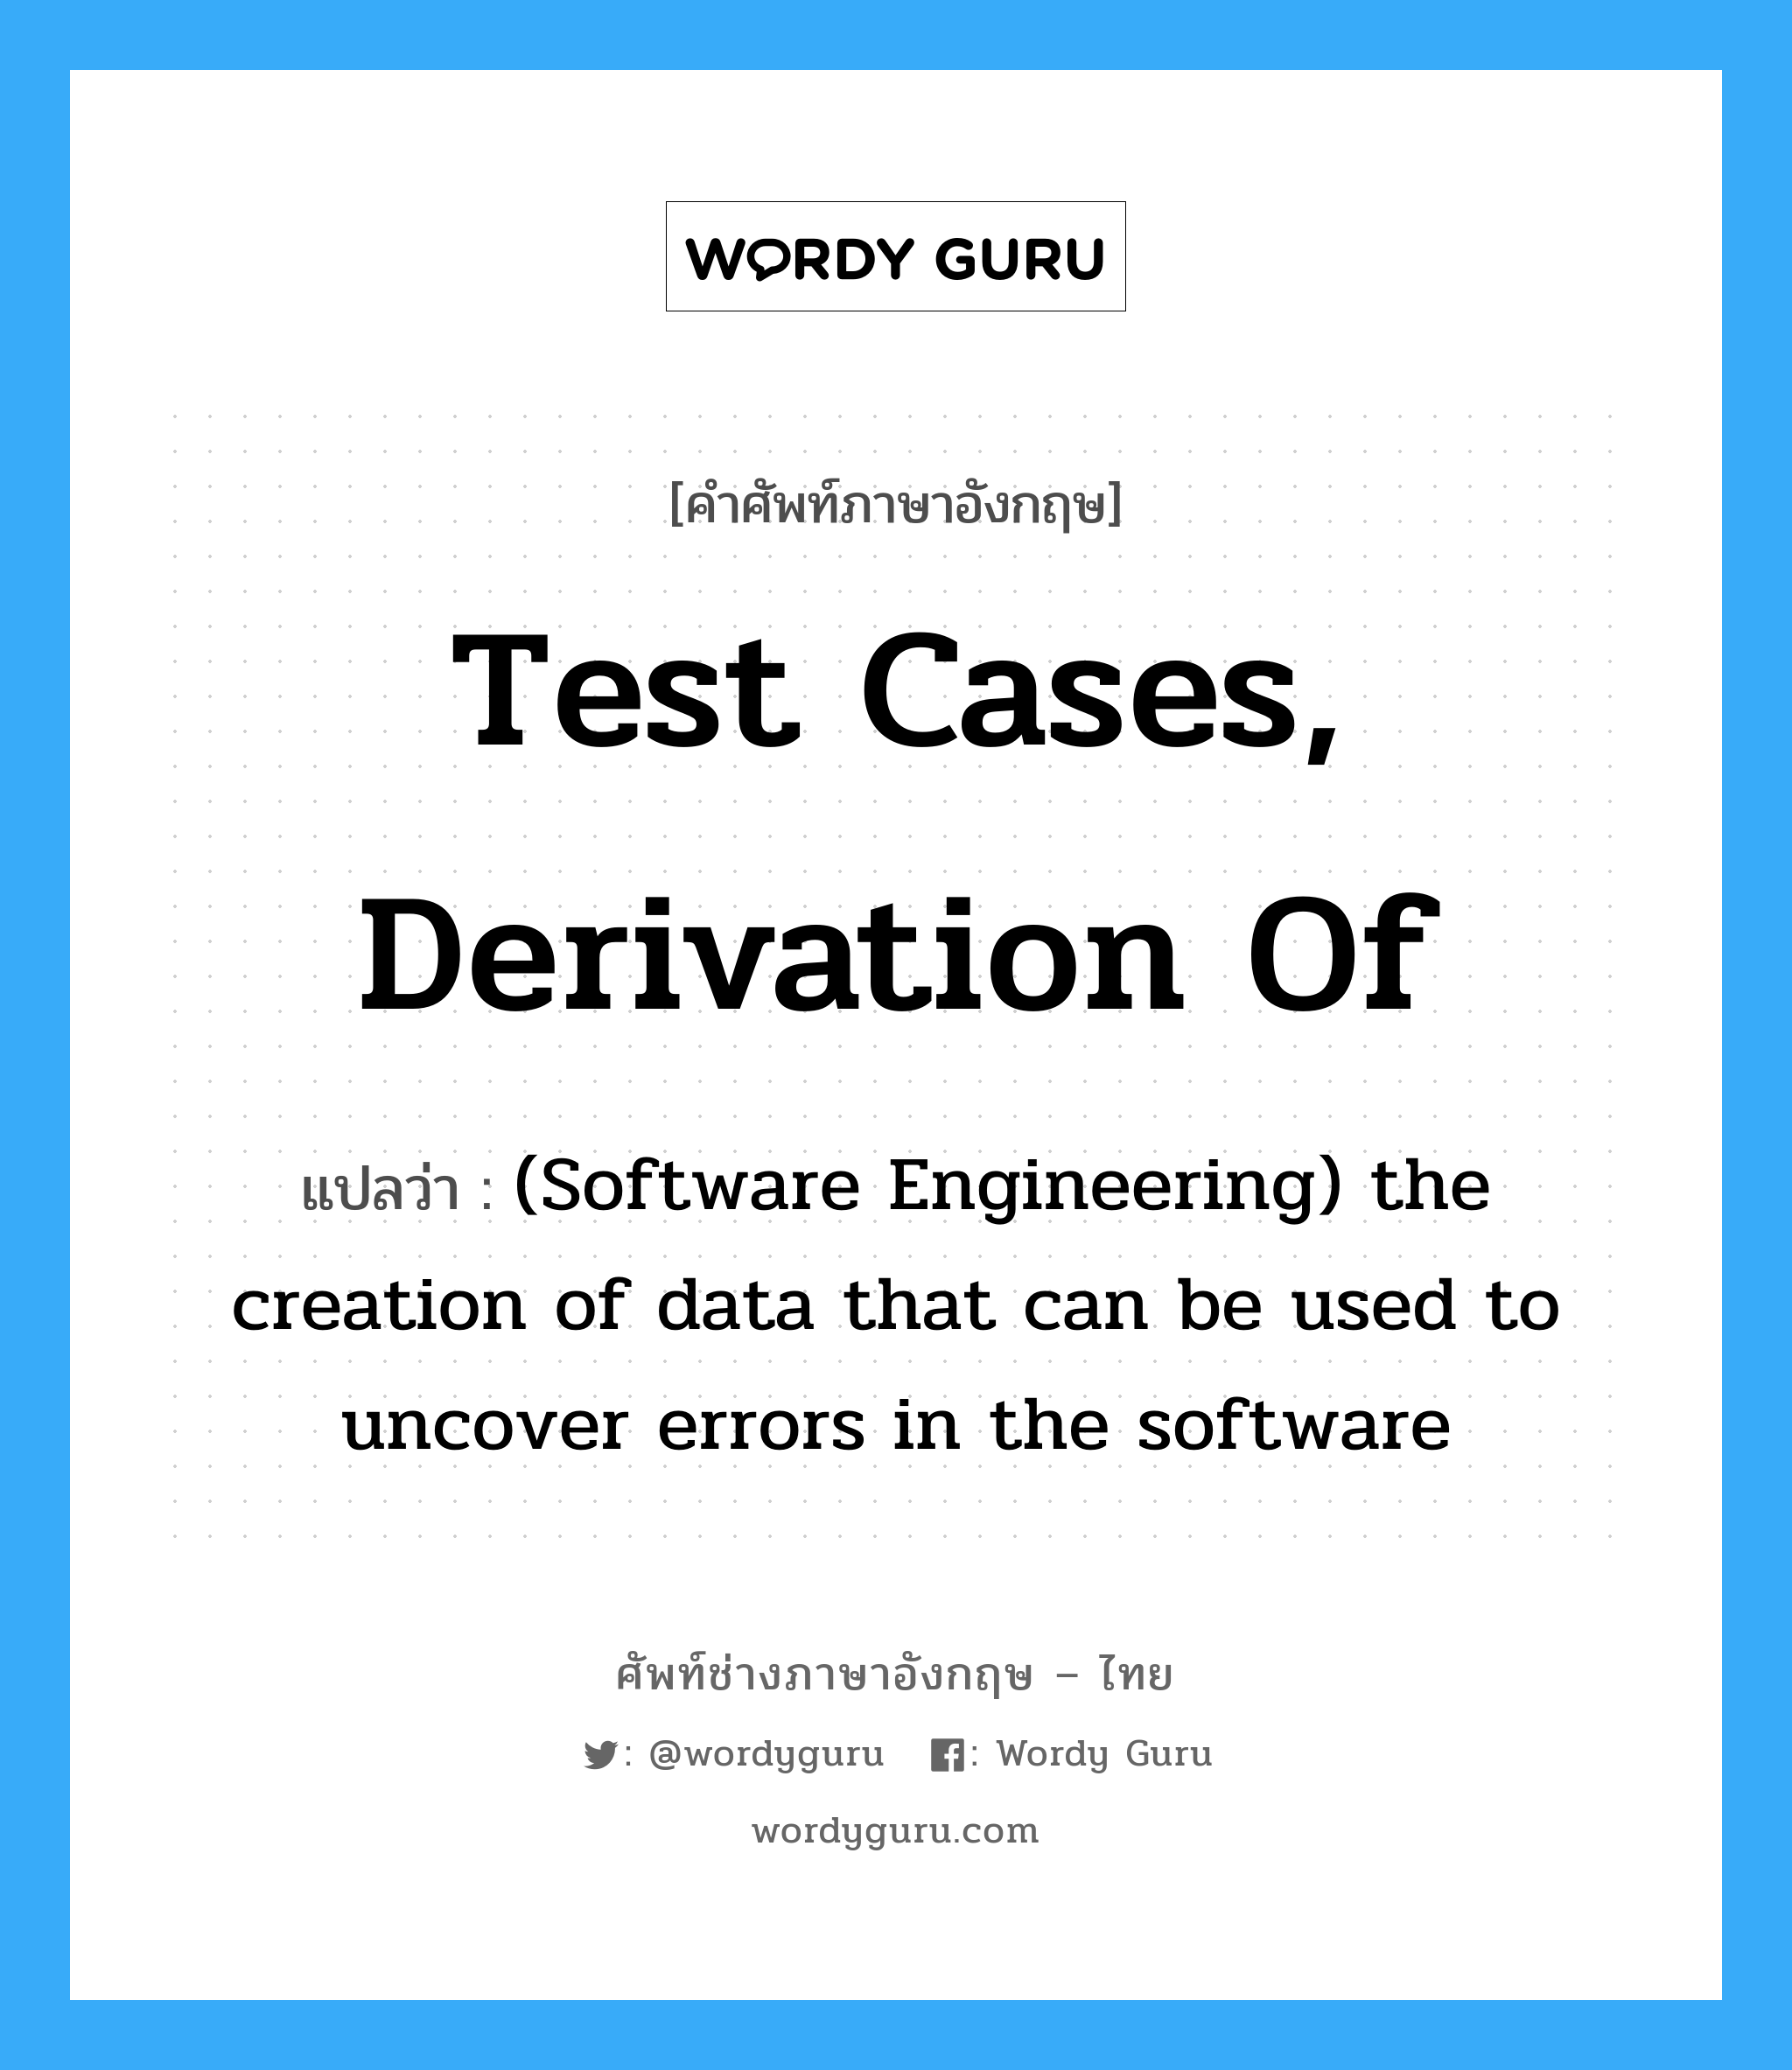 (Software Engineering) the creation of data that can be used to uncover errors in the software ภาษาอังกฤษ?, คำศัพท์ช่างภาษาอังกฤษ - ไทย (Software Engineering) the creation of data that can be used to uncover errors in the software คำศัพท์ภาษาอังกฤษ (Software Engineering) the creation of data that can be used to uncover errors in the software แปลว่า Test cases, derivation of